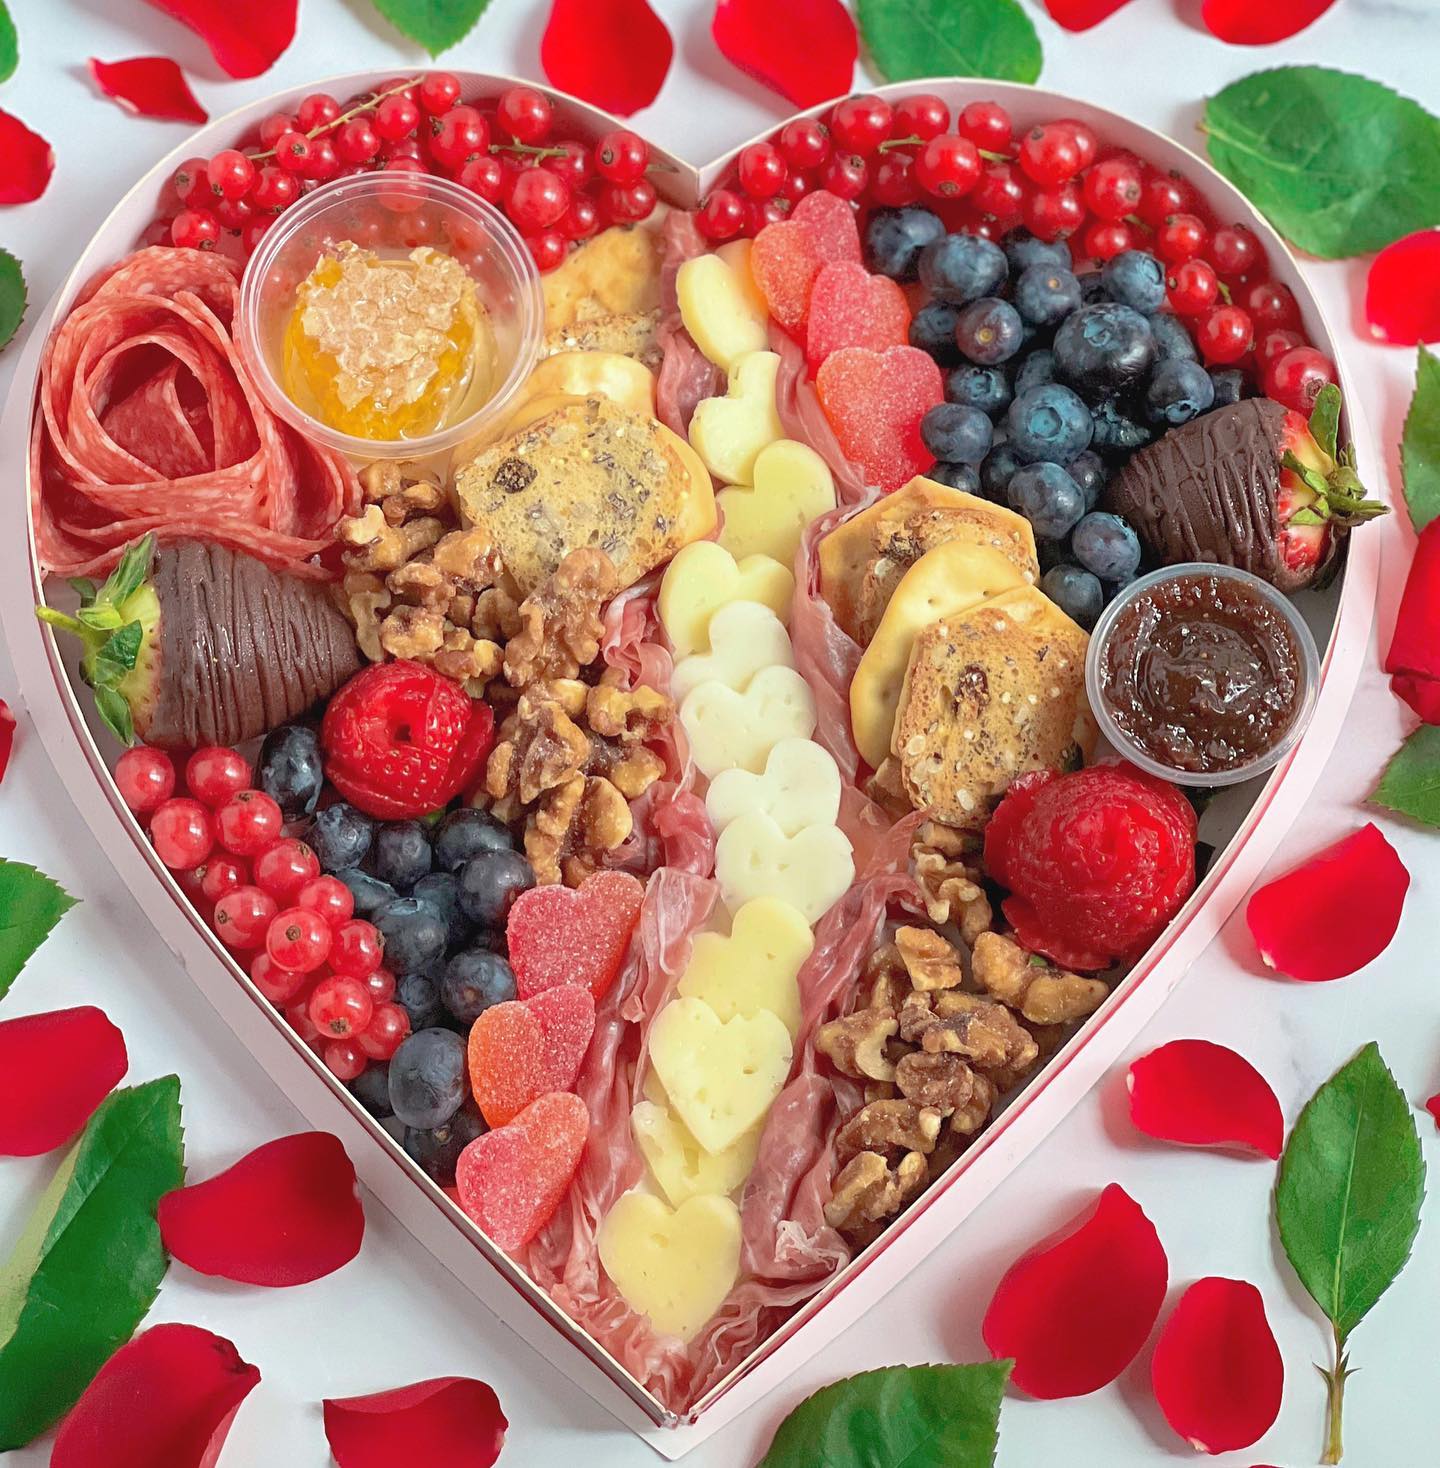 This heart ♥️ shaped box put the cute in charCUTErie. My Valentine’s Day boards made the perfect gift this year, this colorful and tasty spread is great for those who want sweet and savory. 🧀 🥜 
⠀⠀⠀⠀⠀⠀⠀⠀⠀
This box is filled with everything you'll need for an at-home date night, or pre/post night out. It's indulgent in every sense of the word with savory meats and cheeses to balance out the sweet fruits and nuts.
⠀⠀⠀⠀⠀⠀⠀⠀⠀
If you didn’t get a chance to order your Valentine’s Day box, no worries, you can always order your personalized grazing board anything. 😉 
°°°
#charcuterie #valentinesday #galentinesday #BADEatTribe #dcfoodblogger #dcfoodie #dmvfoodie #recipeideas #dmvfoodies #dceatss #cheeseboard #valentinestreats #blackgirlswhlblog #vdayfood